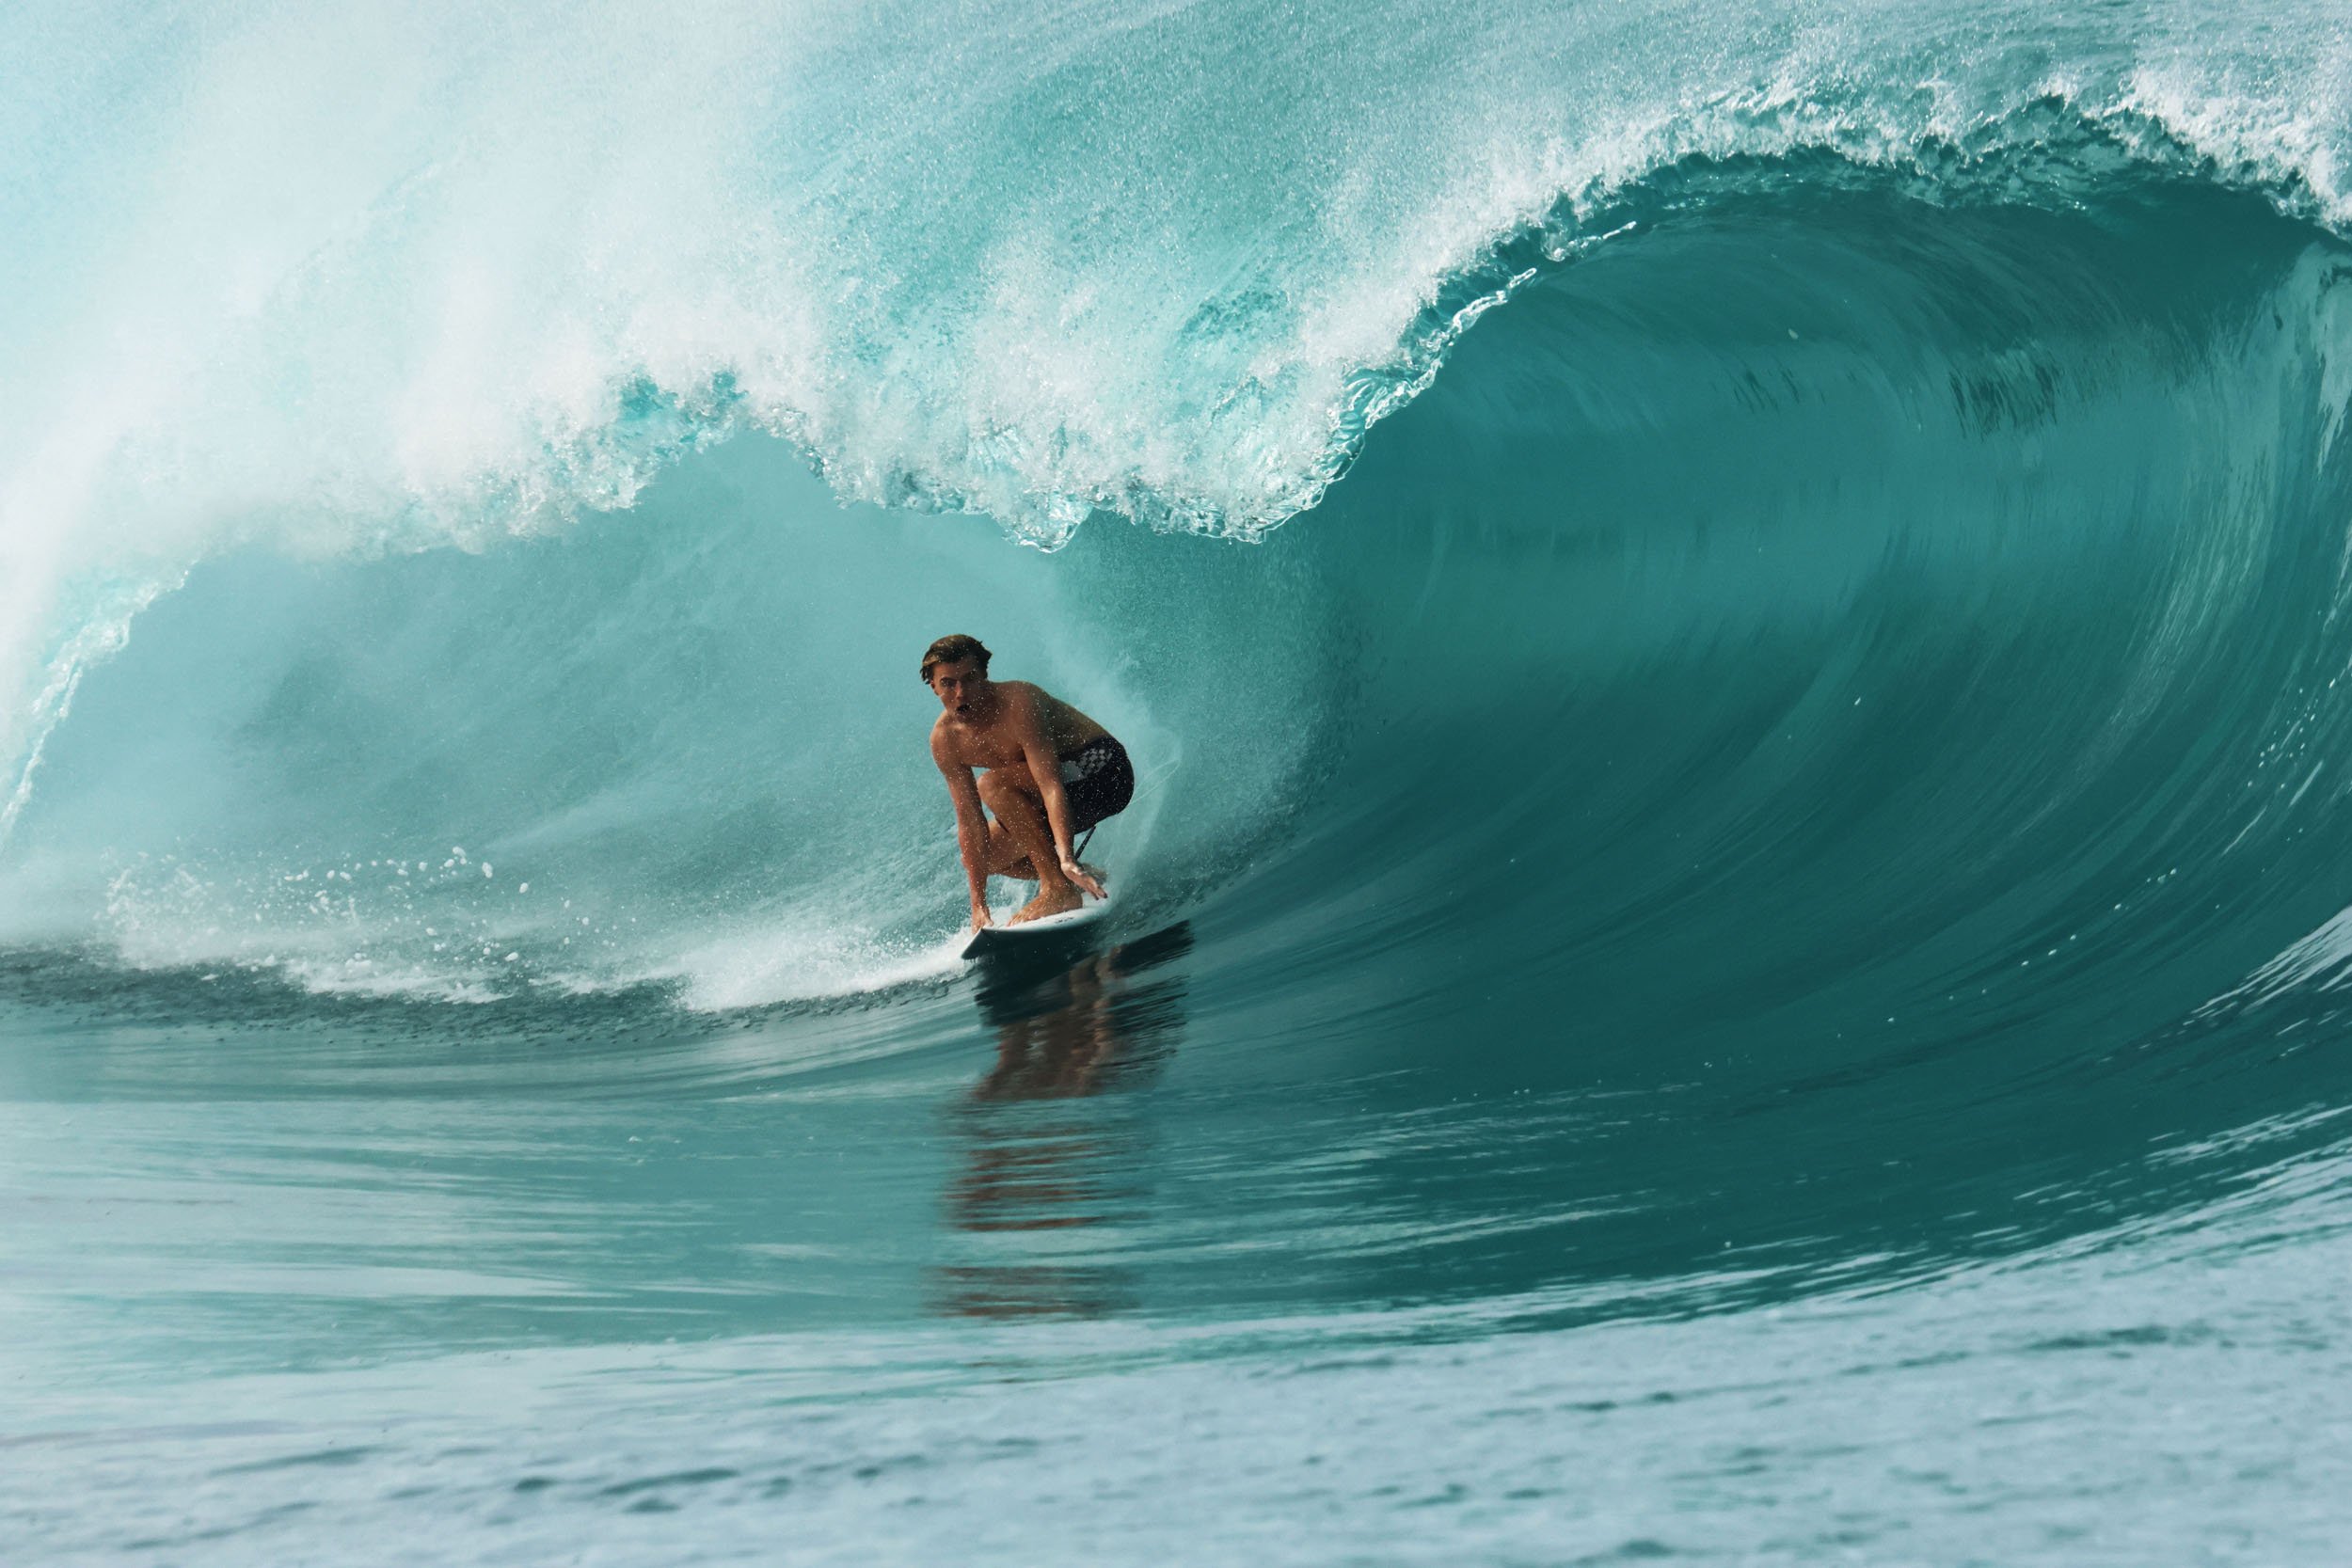 Mentawai's most notorious end section